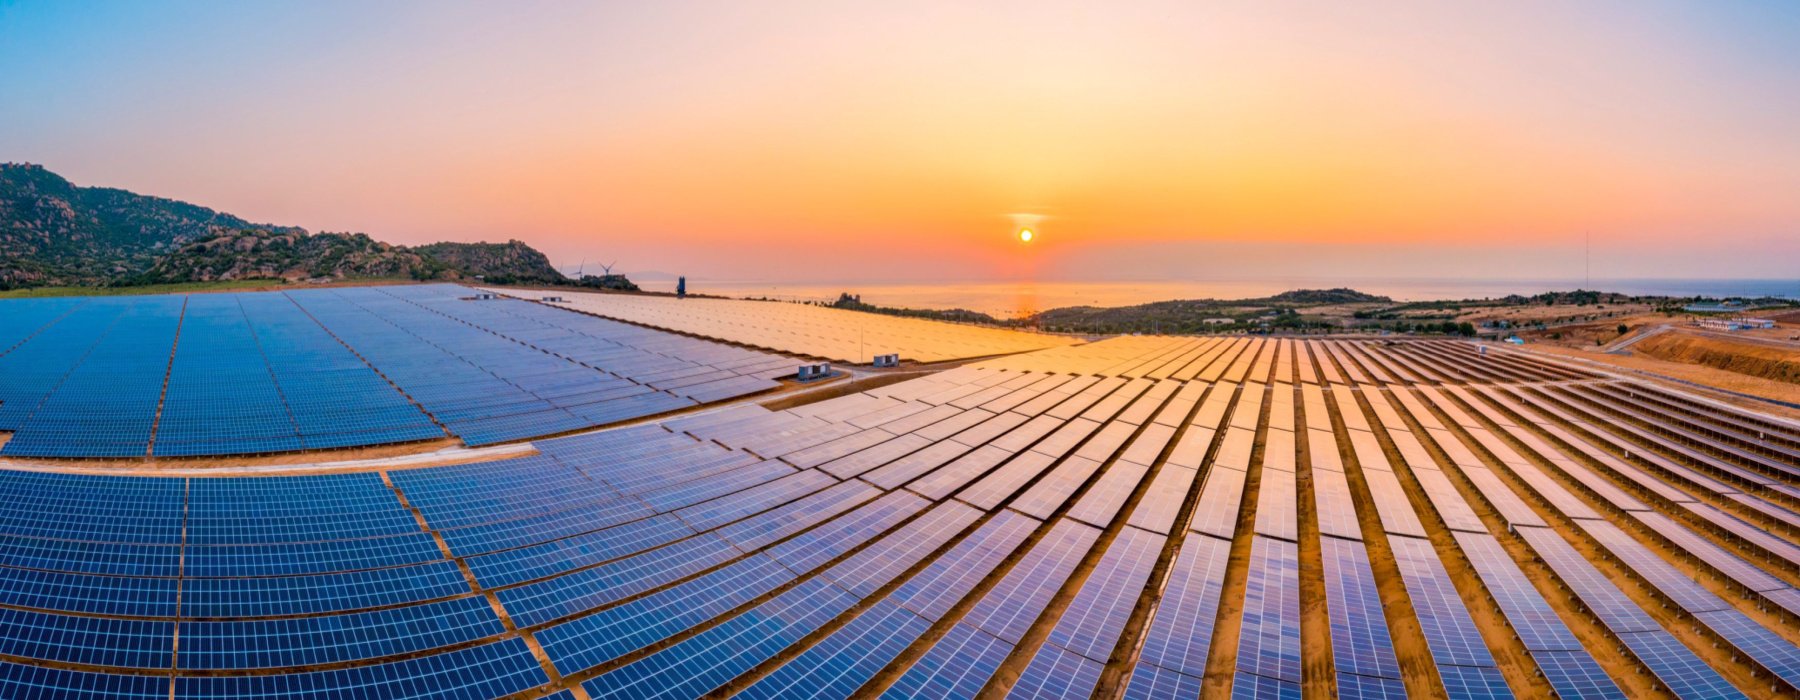 How Does the Inflation Reduction Act Benefit Solar Power?